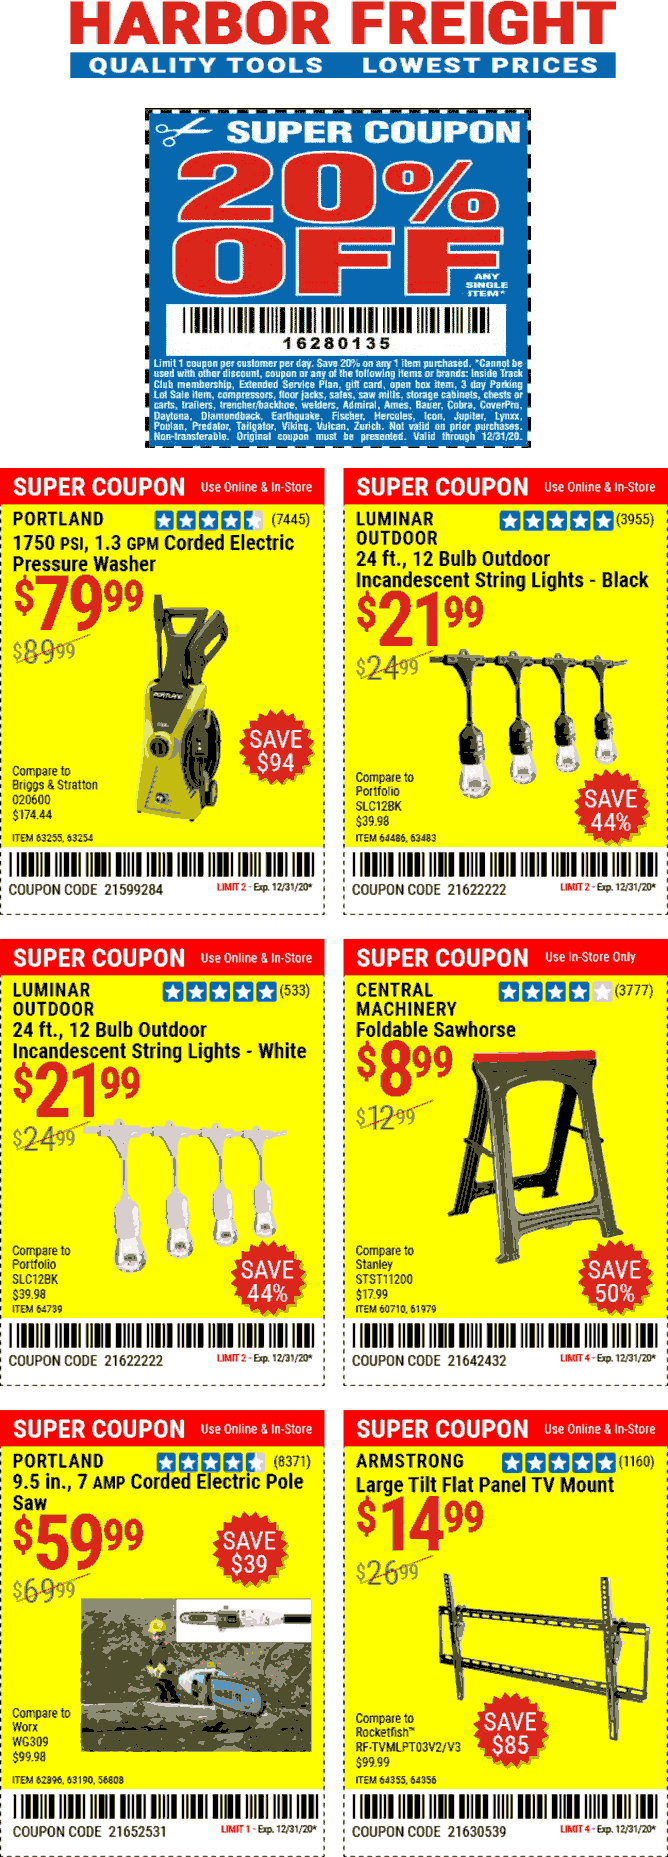 Harbor Freight stores Coupon  20% off a single item & more at Harbor Freight Tools #harborfreight 